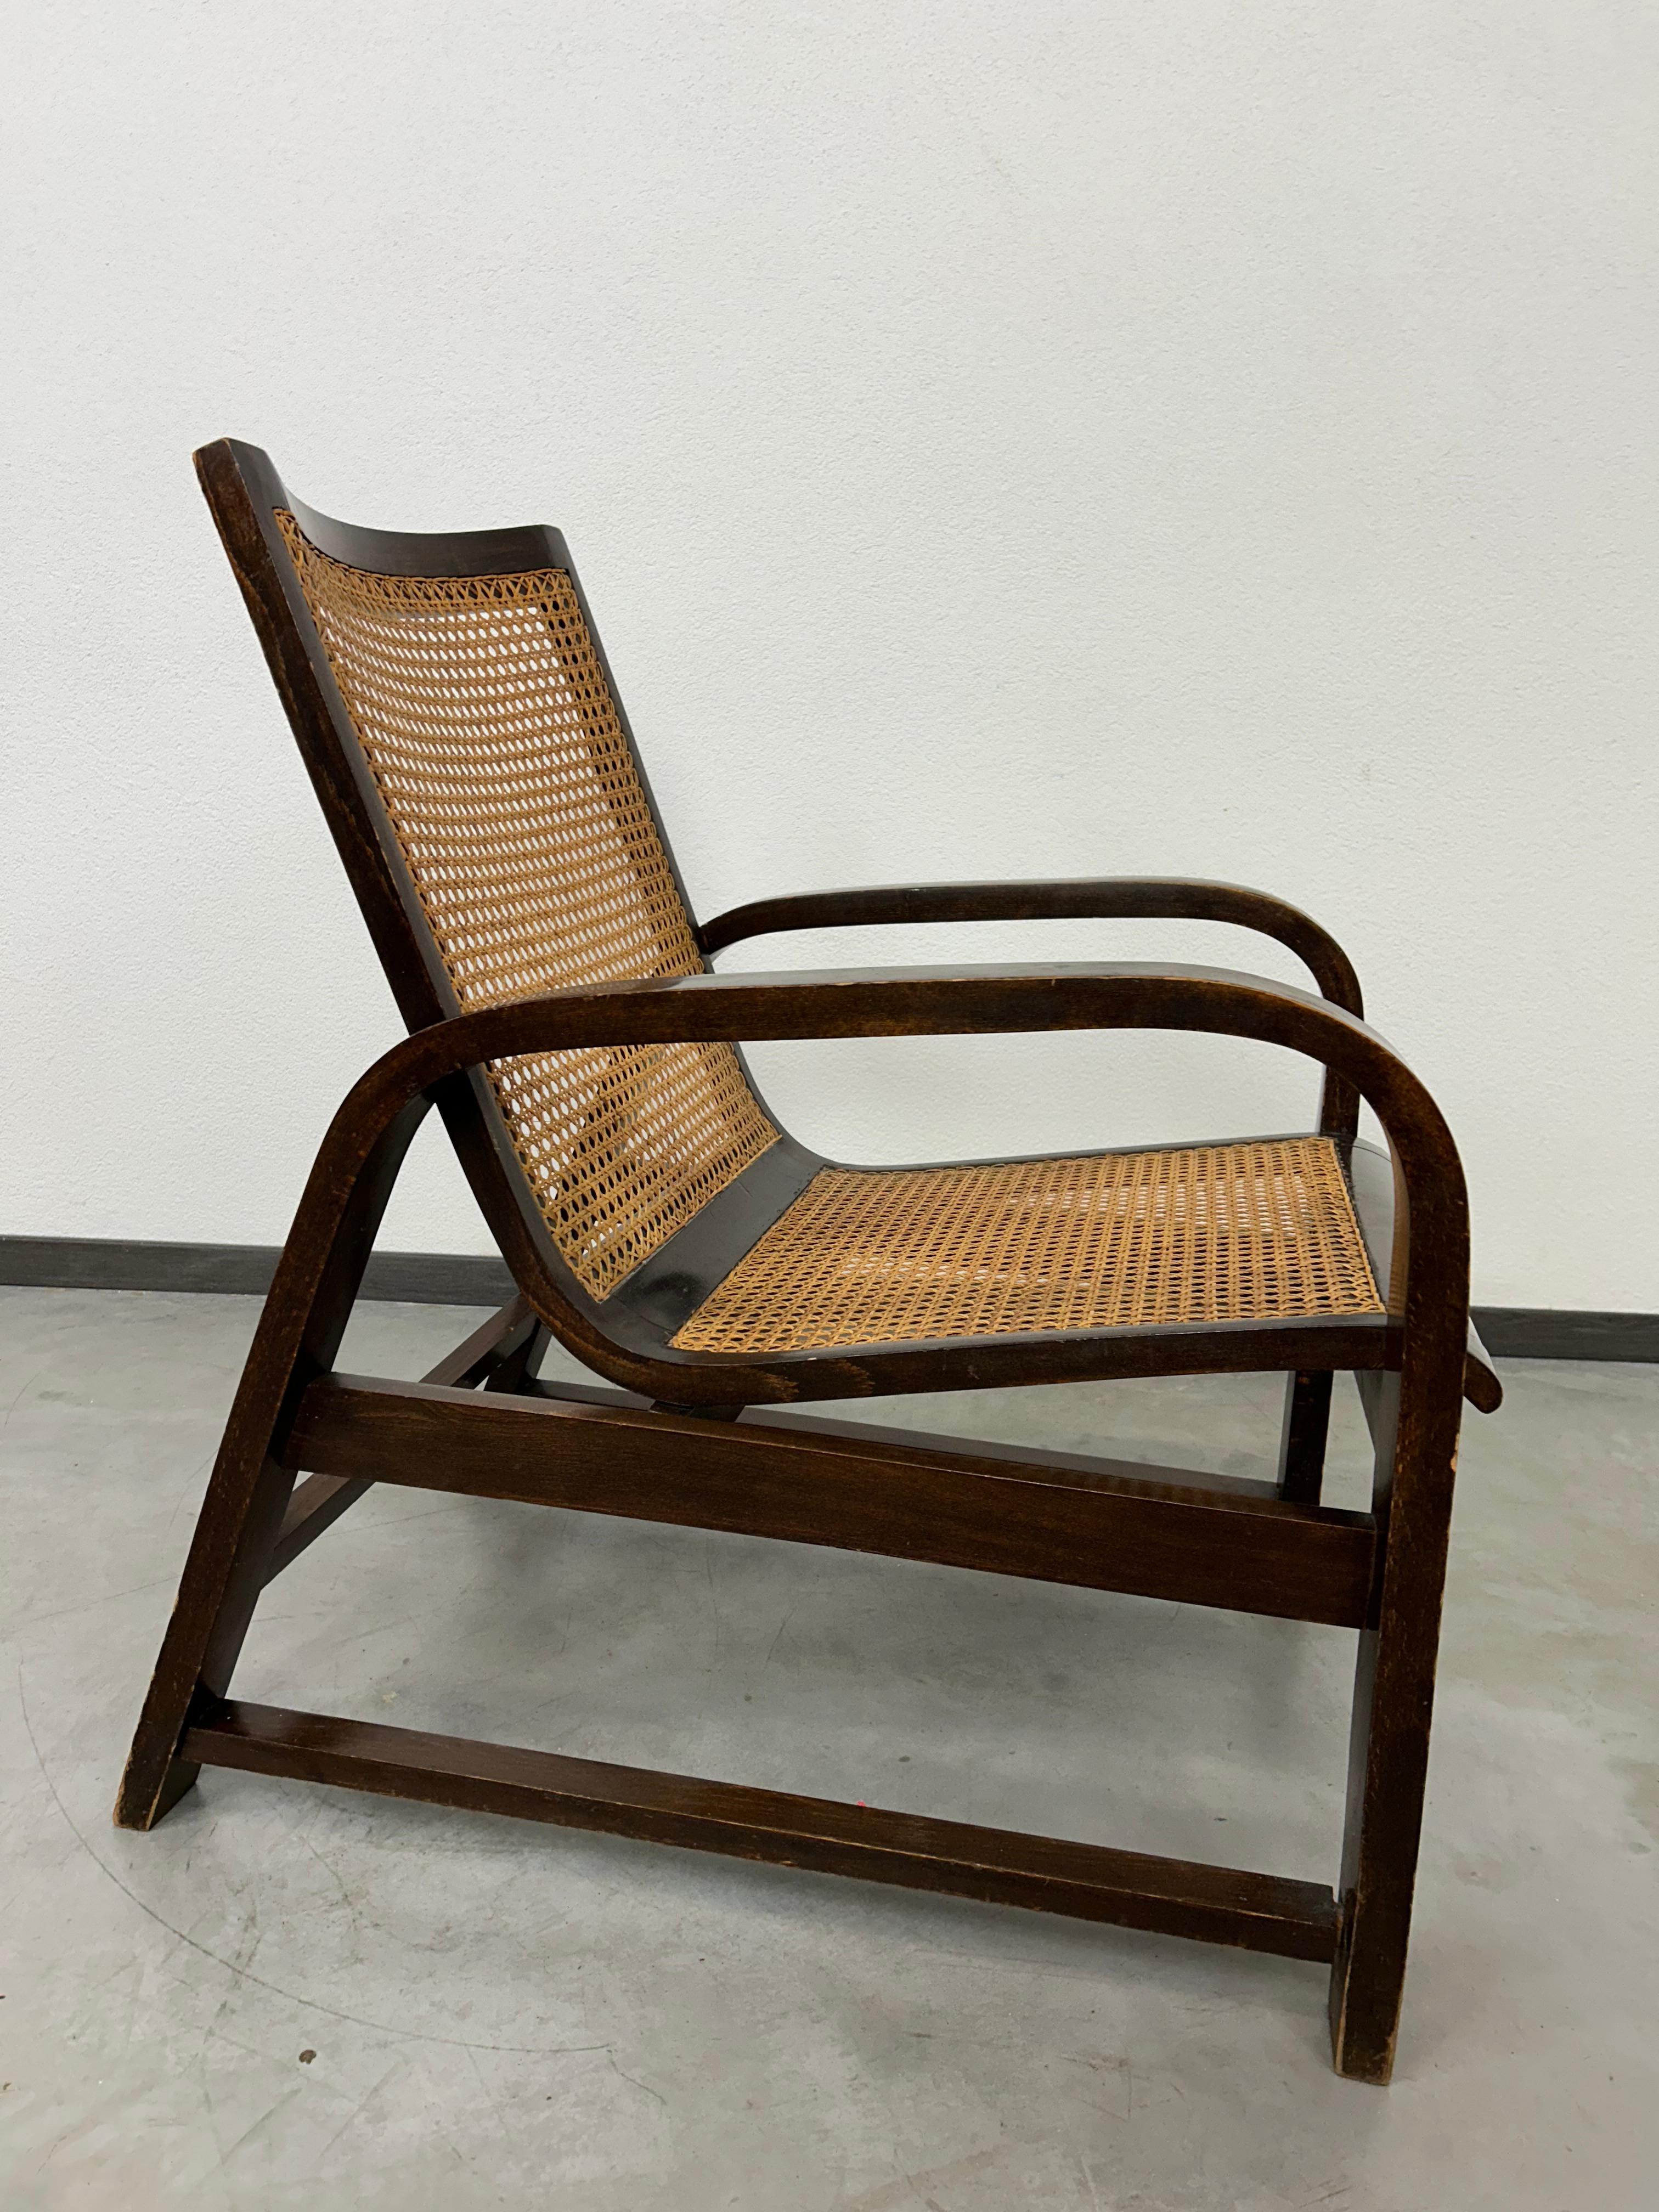 Functionalist bentwood lounge chair by Thonet Mundus In Good Condition For Sale In Banská Štiavnica, SK